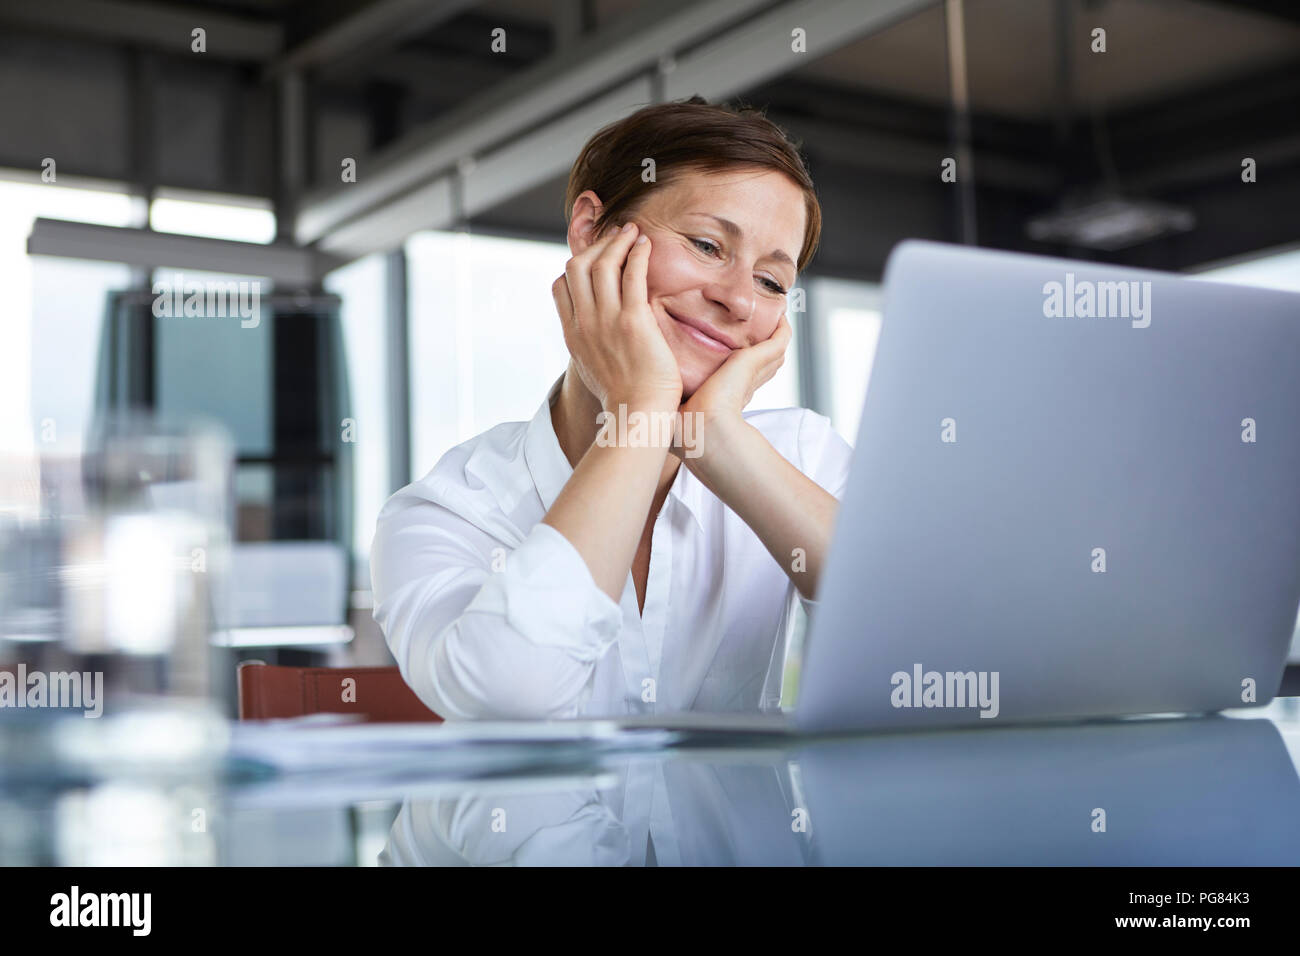 Smiling businesswoman sitting at glass table in office looking at laptop Stock Photo